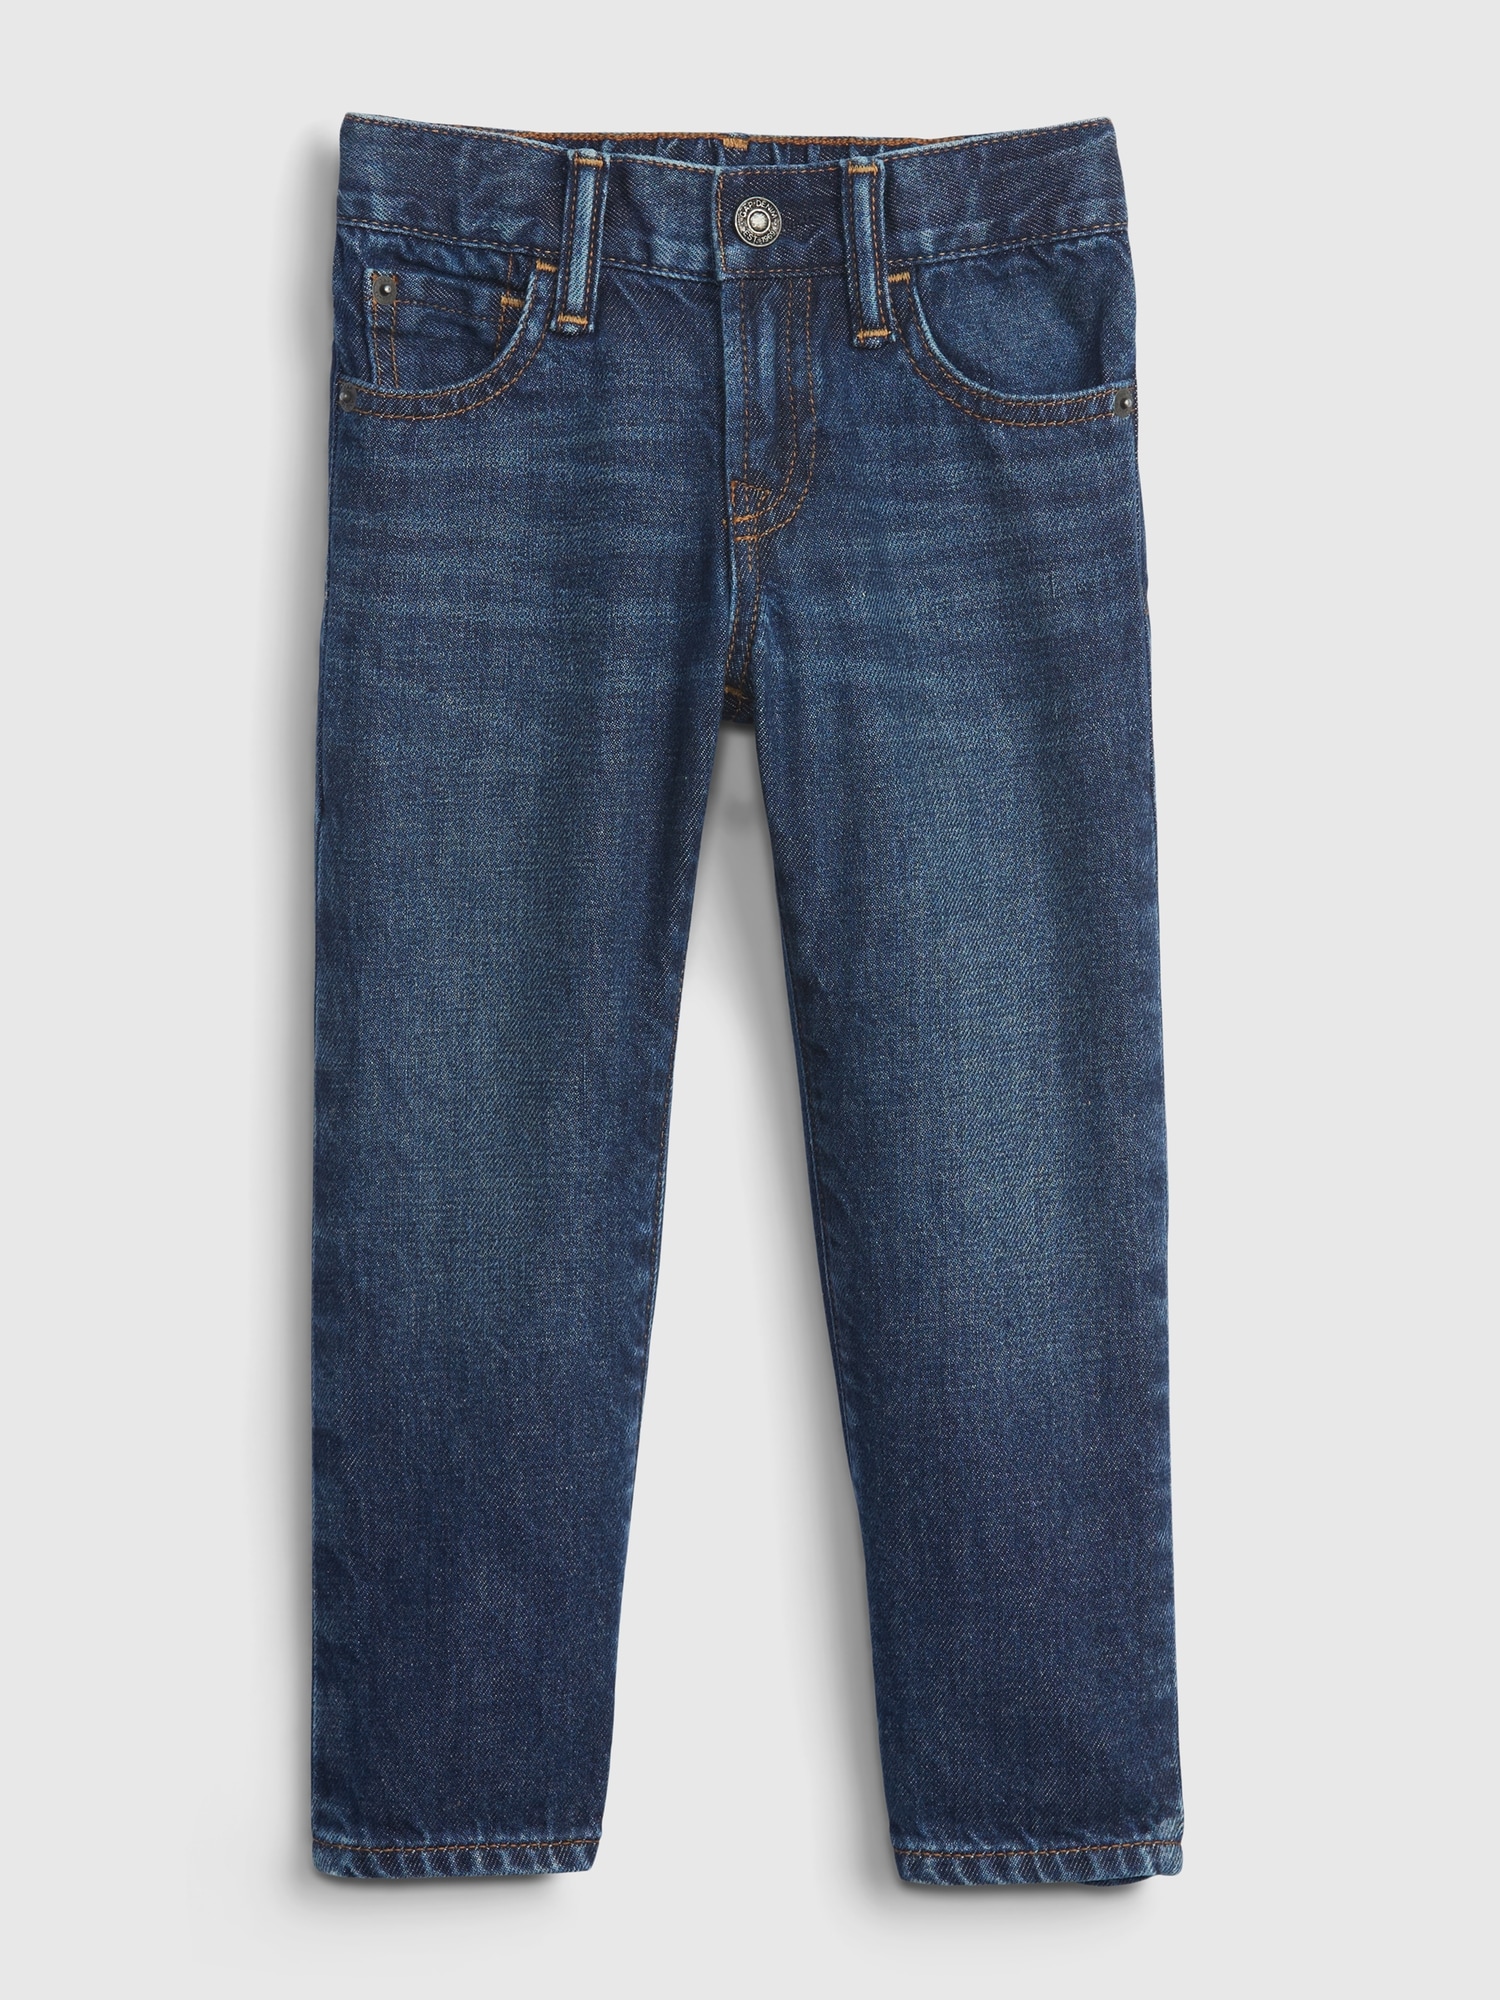 Toddler Original Fit Jeans with Washwell | Gap